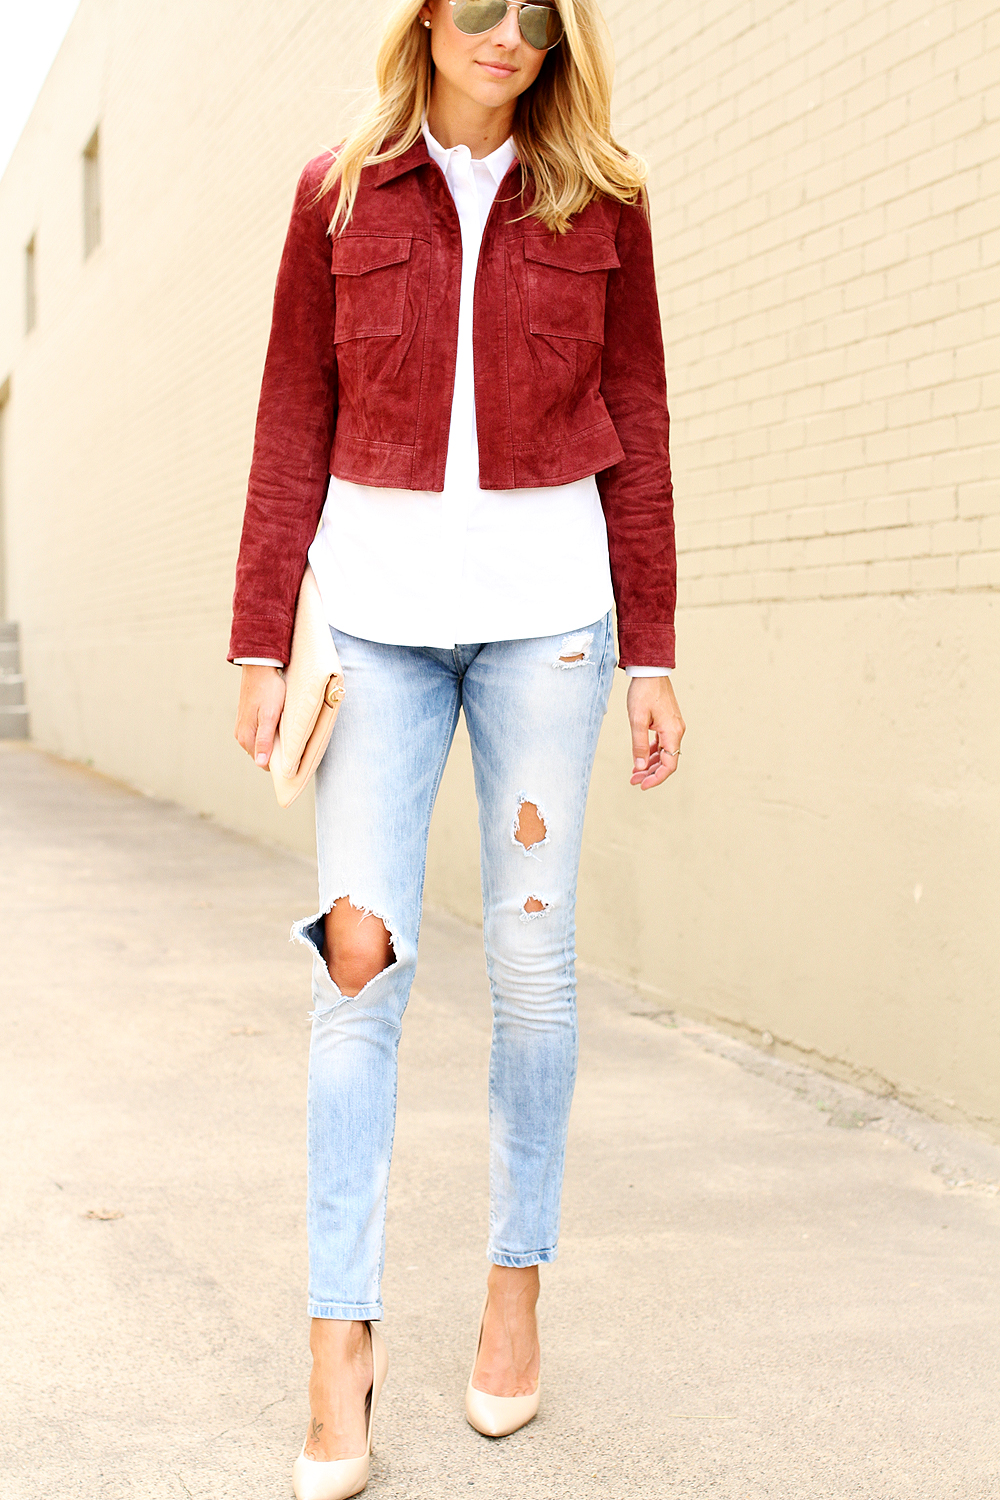 fashion-jackson-burgundy-suede-jacket-white-button-up-shirt-ripped-skinny-jeans-gigi-new-york-blush-carly-clutch-charles-by-charles-david-nude-pumps